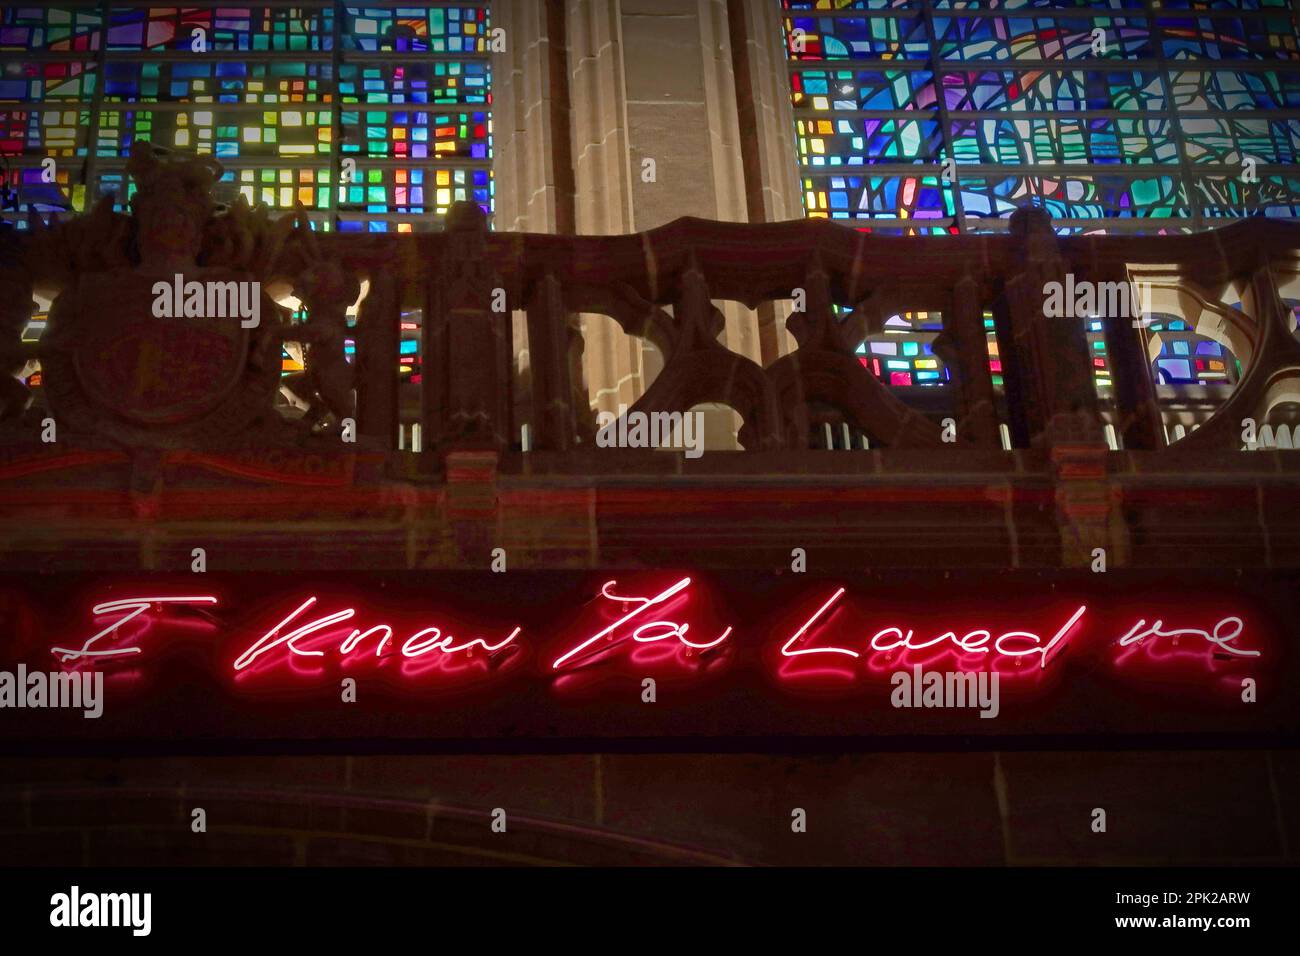 Tracey Emin - I knew you loved me, neon words at Liverpool Anglican Cathedral, St James' Mount, Liverpool, Merseyside, England, UK, L1 7AZ Stock Photo